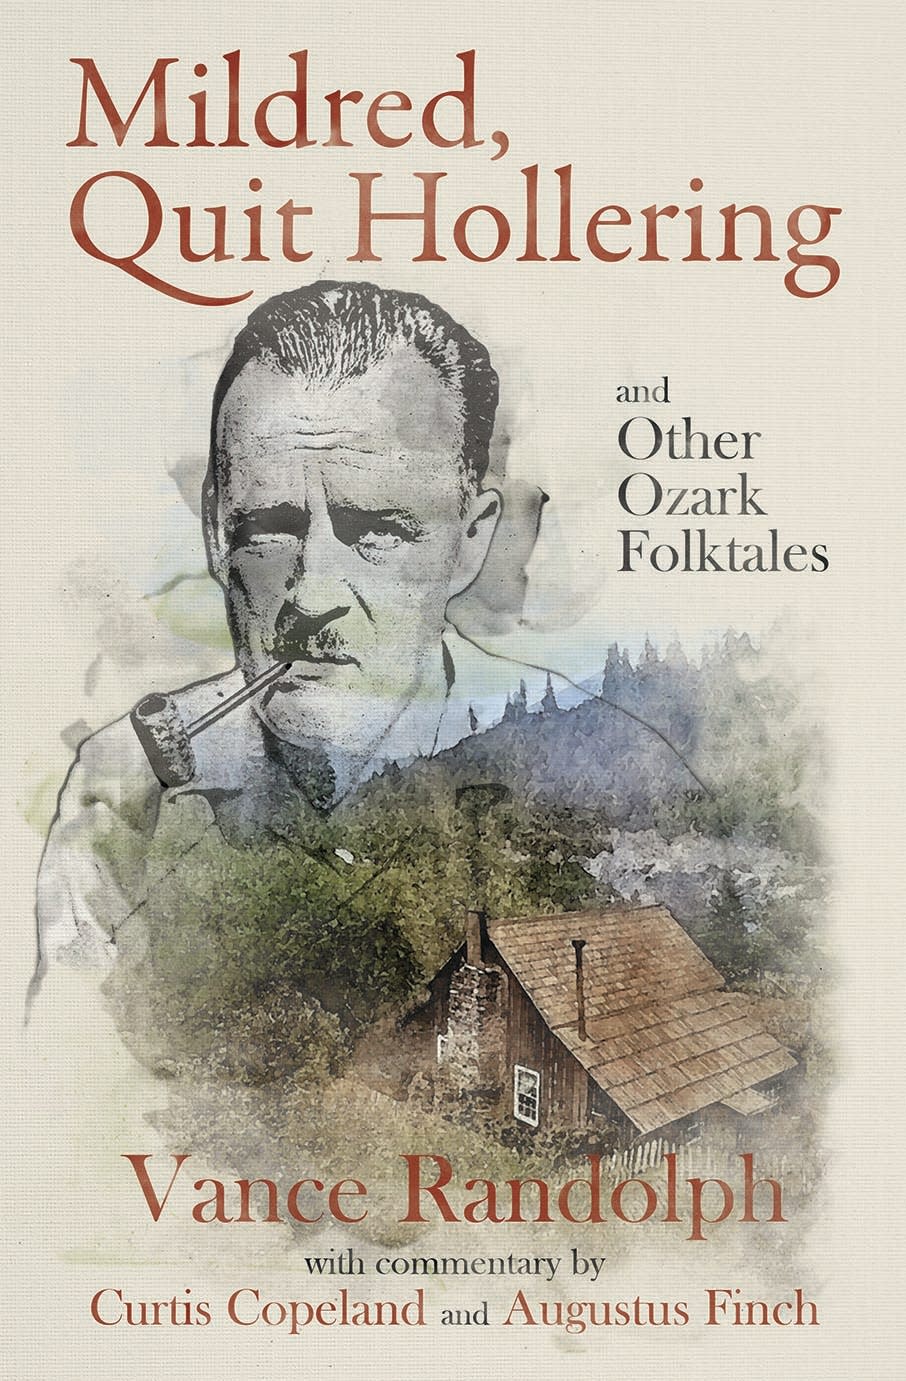 "Mildred, Quit Hollering! and Other Ozark Folktales" is a collection of 38 unpublished stories from Ozarks folklorist Vance Randolph.